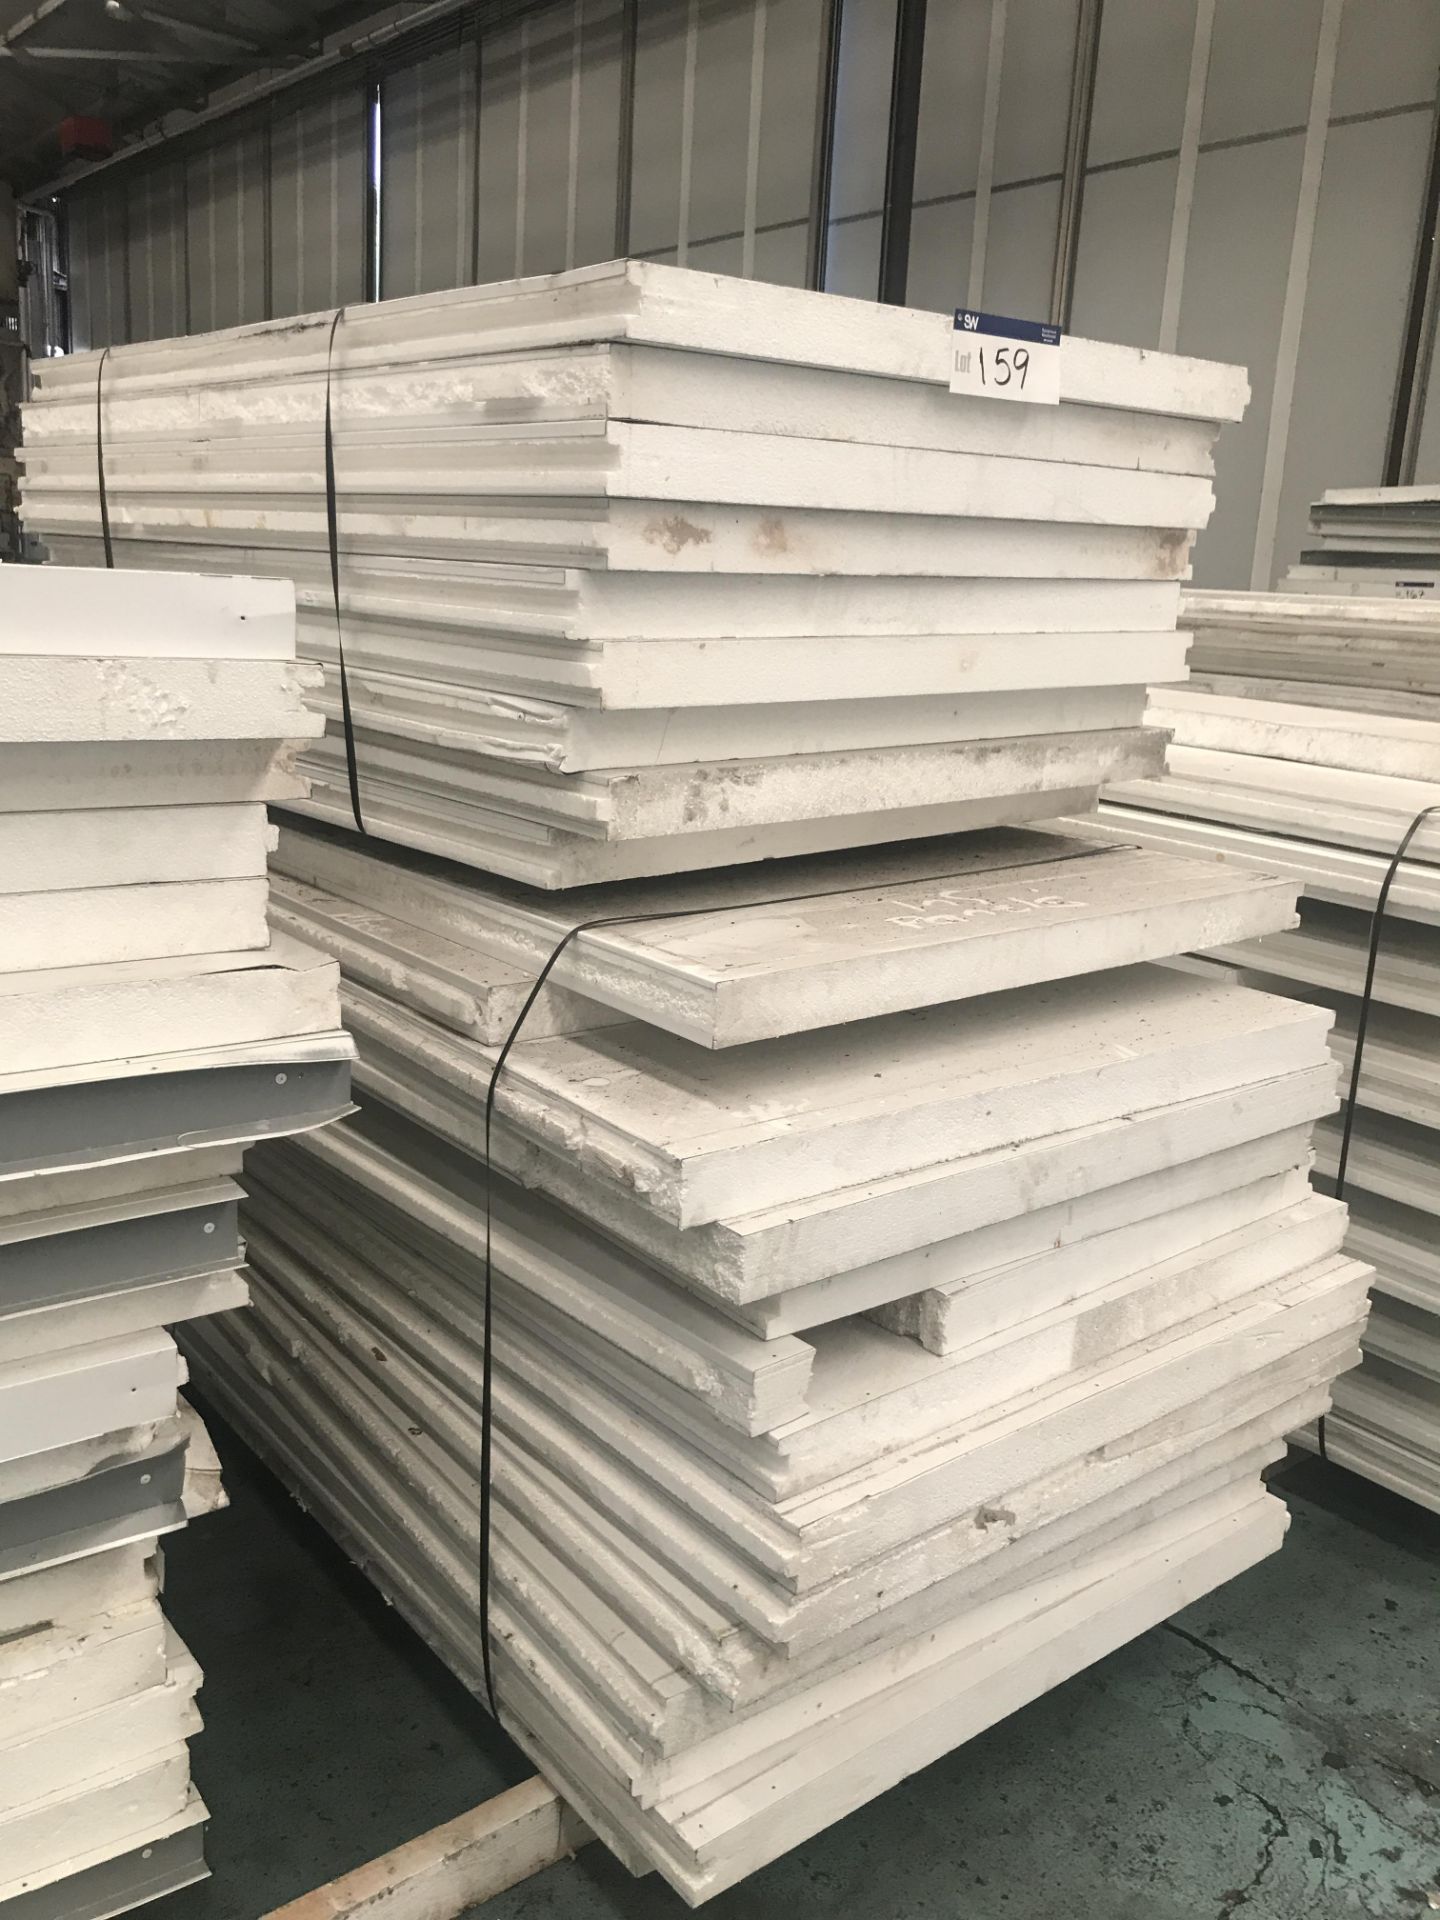 Assorted Insulated Board, up to 2.6m long, as set out in stack